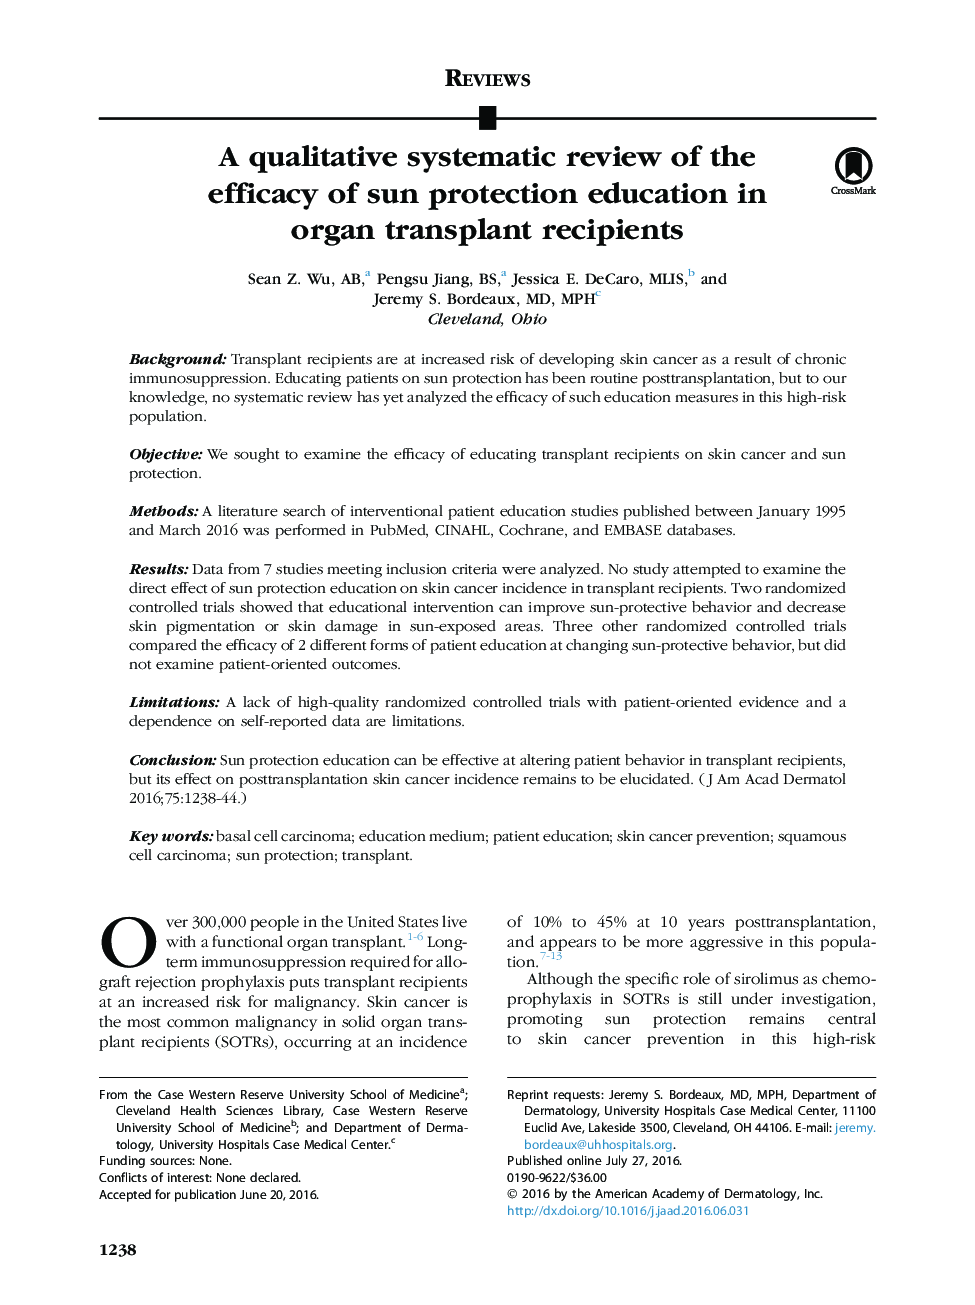 A qualitative systematic review of the efficacy of sun protection education in organ transplant recipients